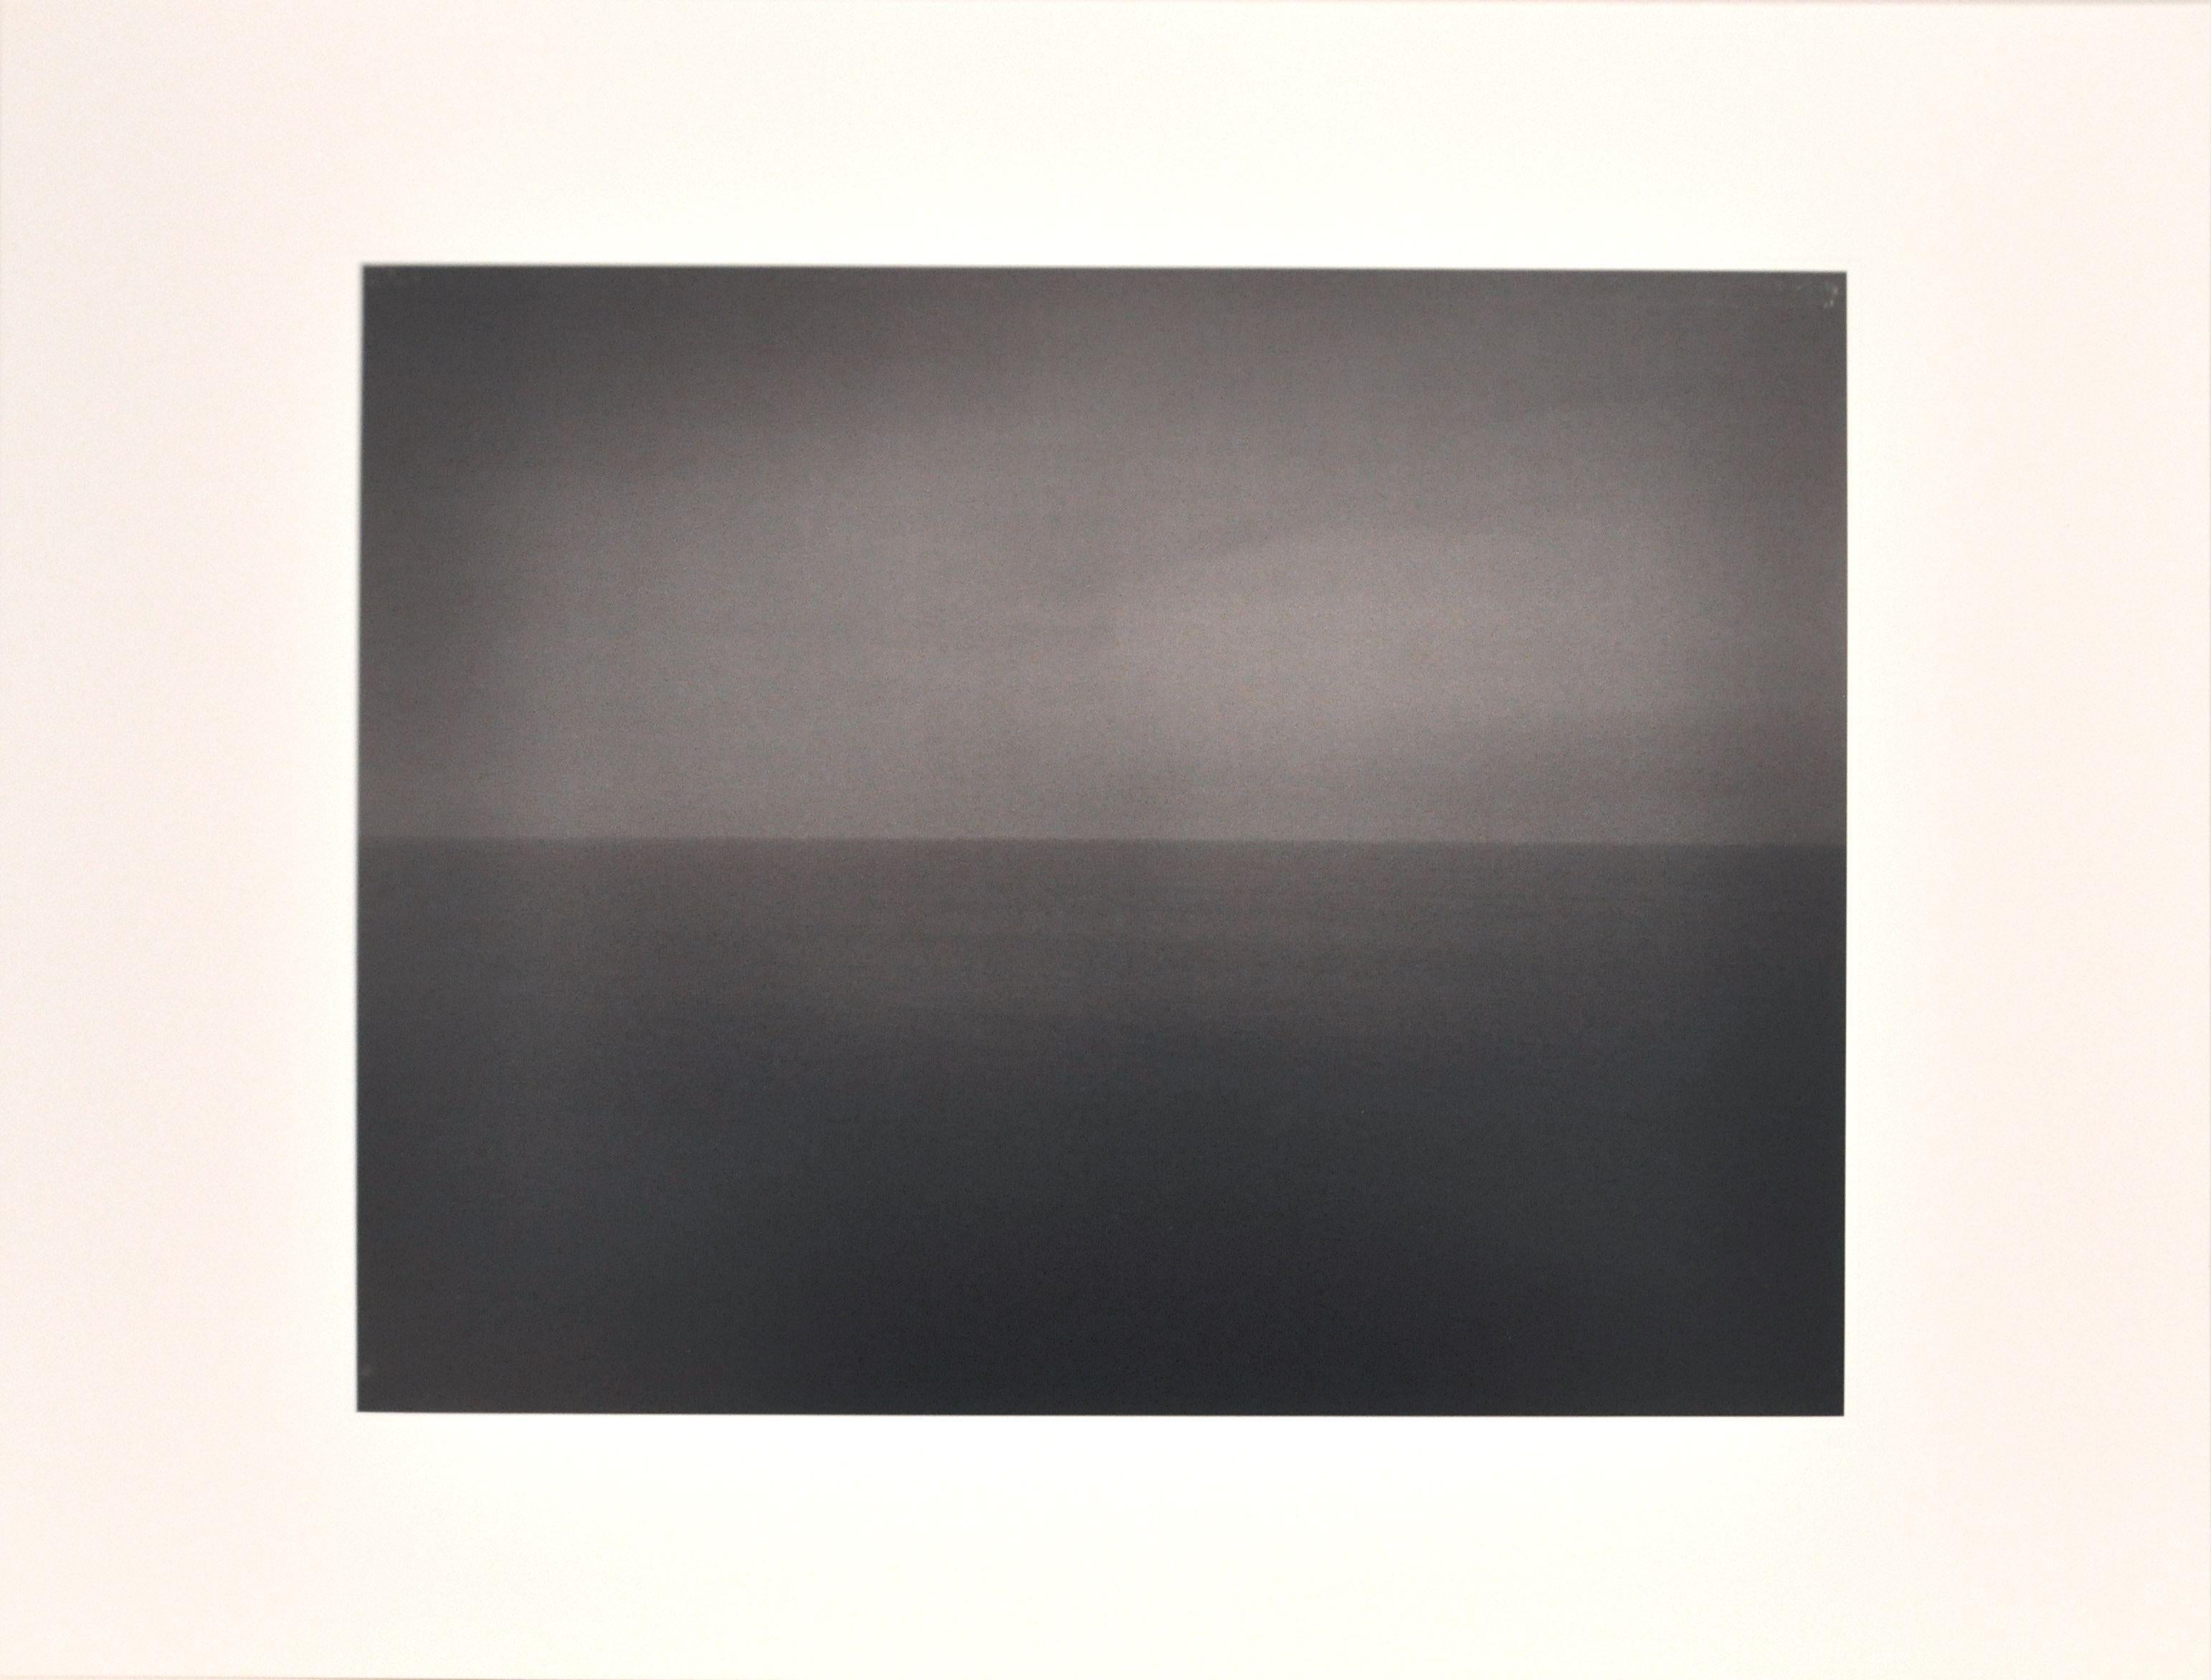 “I imagine my vision then try to make it happen, just like painting,” Sugimoto says. �“The reality is there, but how to make it like my reality.”
This photograph by Hiroshi Sugimoto exemplifies his "Time Exposed" series. Here, the image depicts a